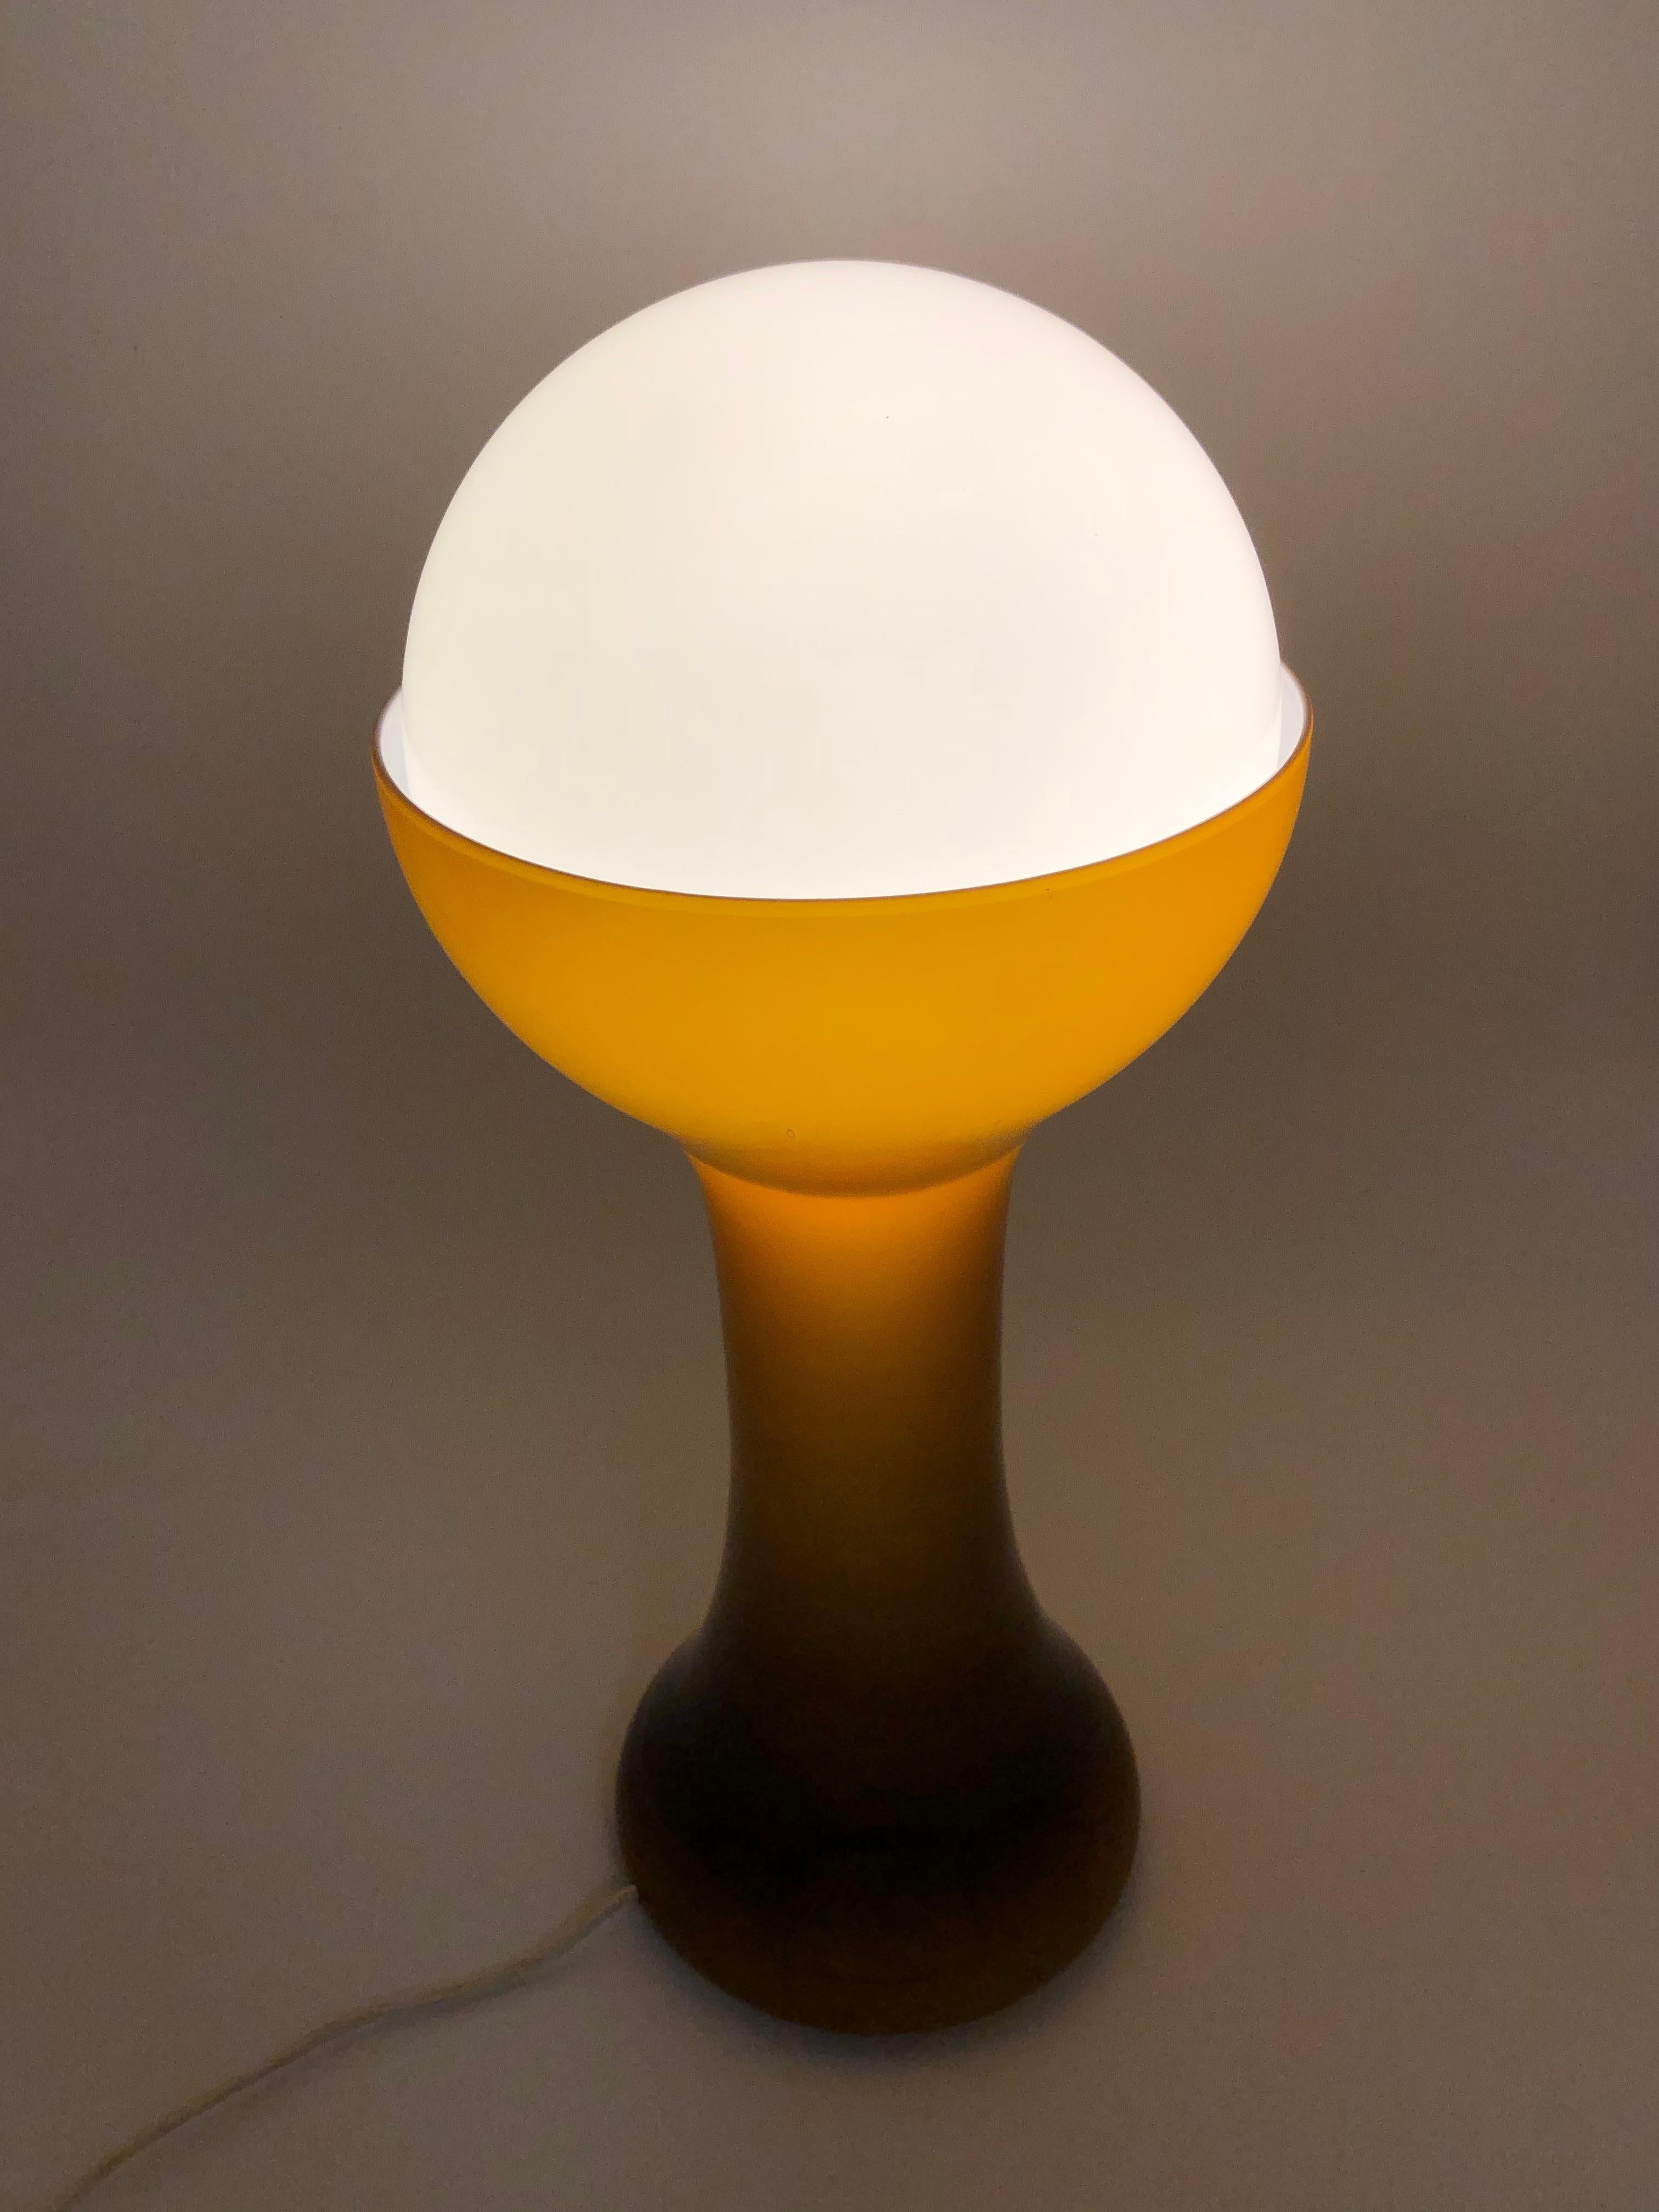 Blown Murano glass table lamp by Italian designer Carlo Nason, dating from the 1970s. Removable dome shade.